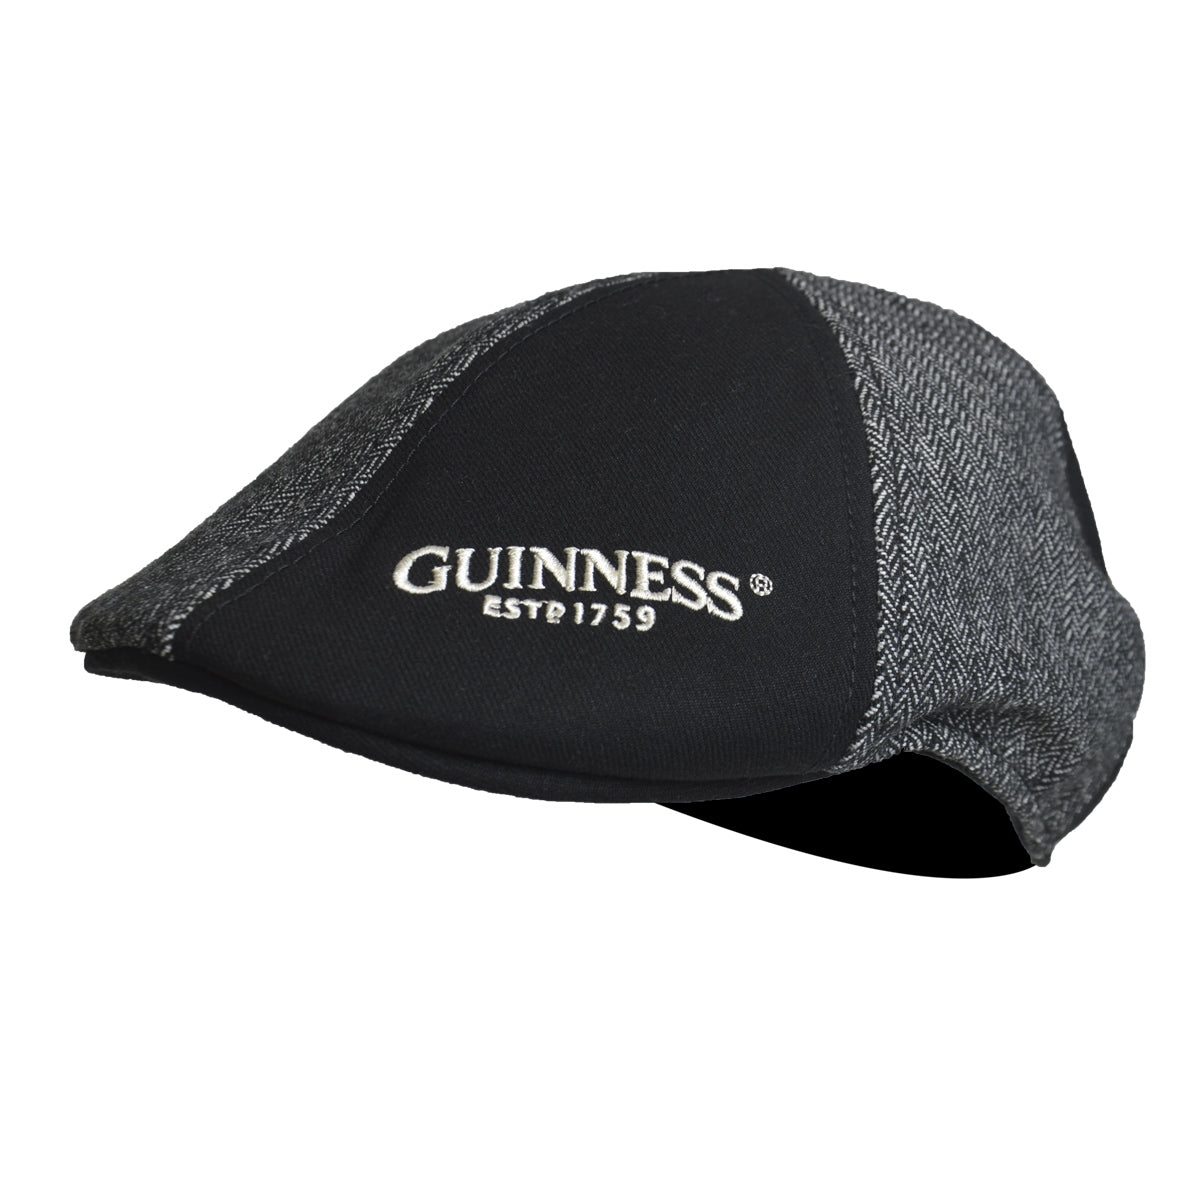 Embroidered Guinness Paneled Ivy cap - black and grey.
Product Name: Paneled Ivy Cap
Brand Name: Guinness